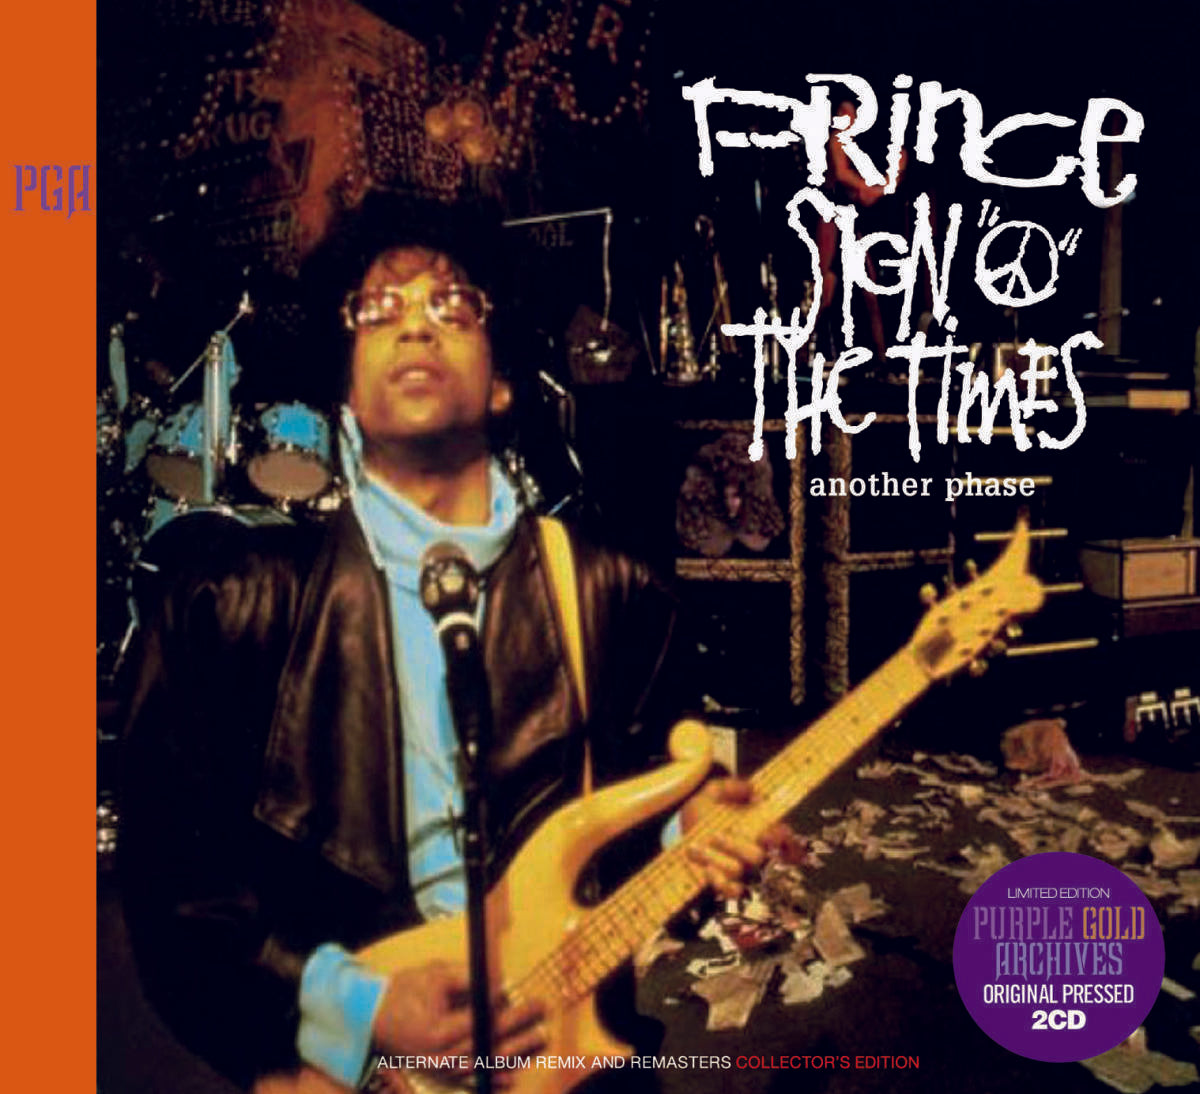 Prince Sign 'O' The Times Another Phase Alternate Album Remix And 